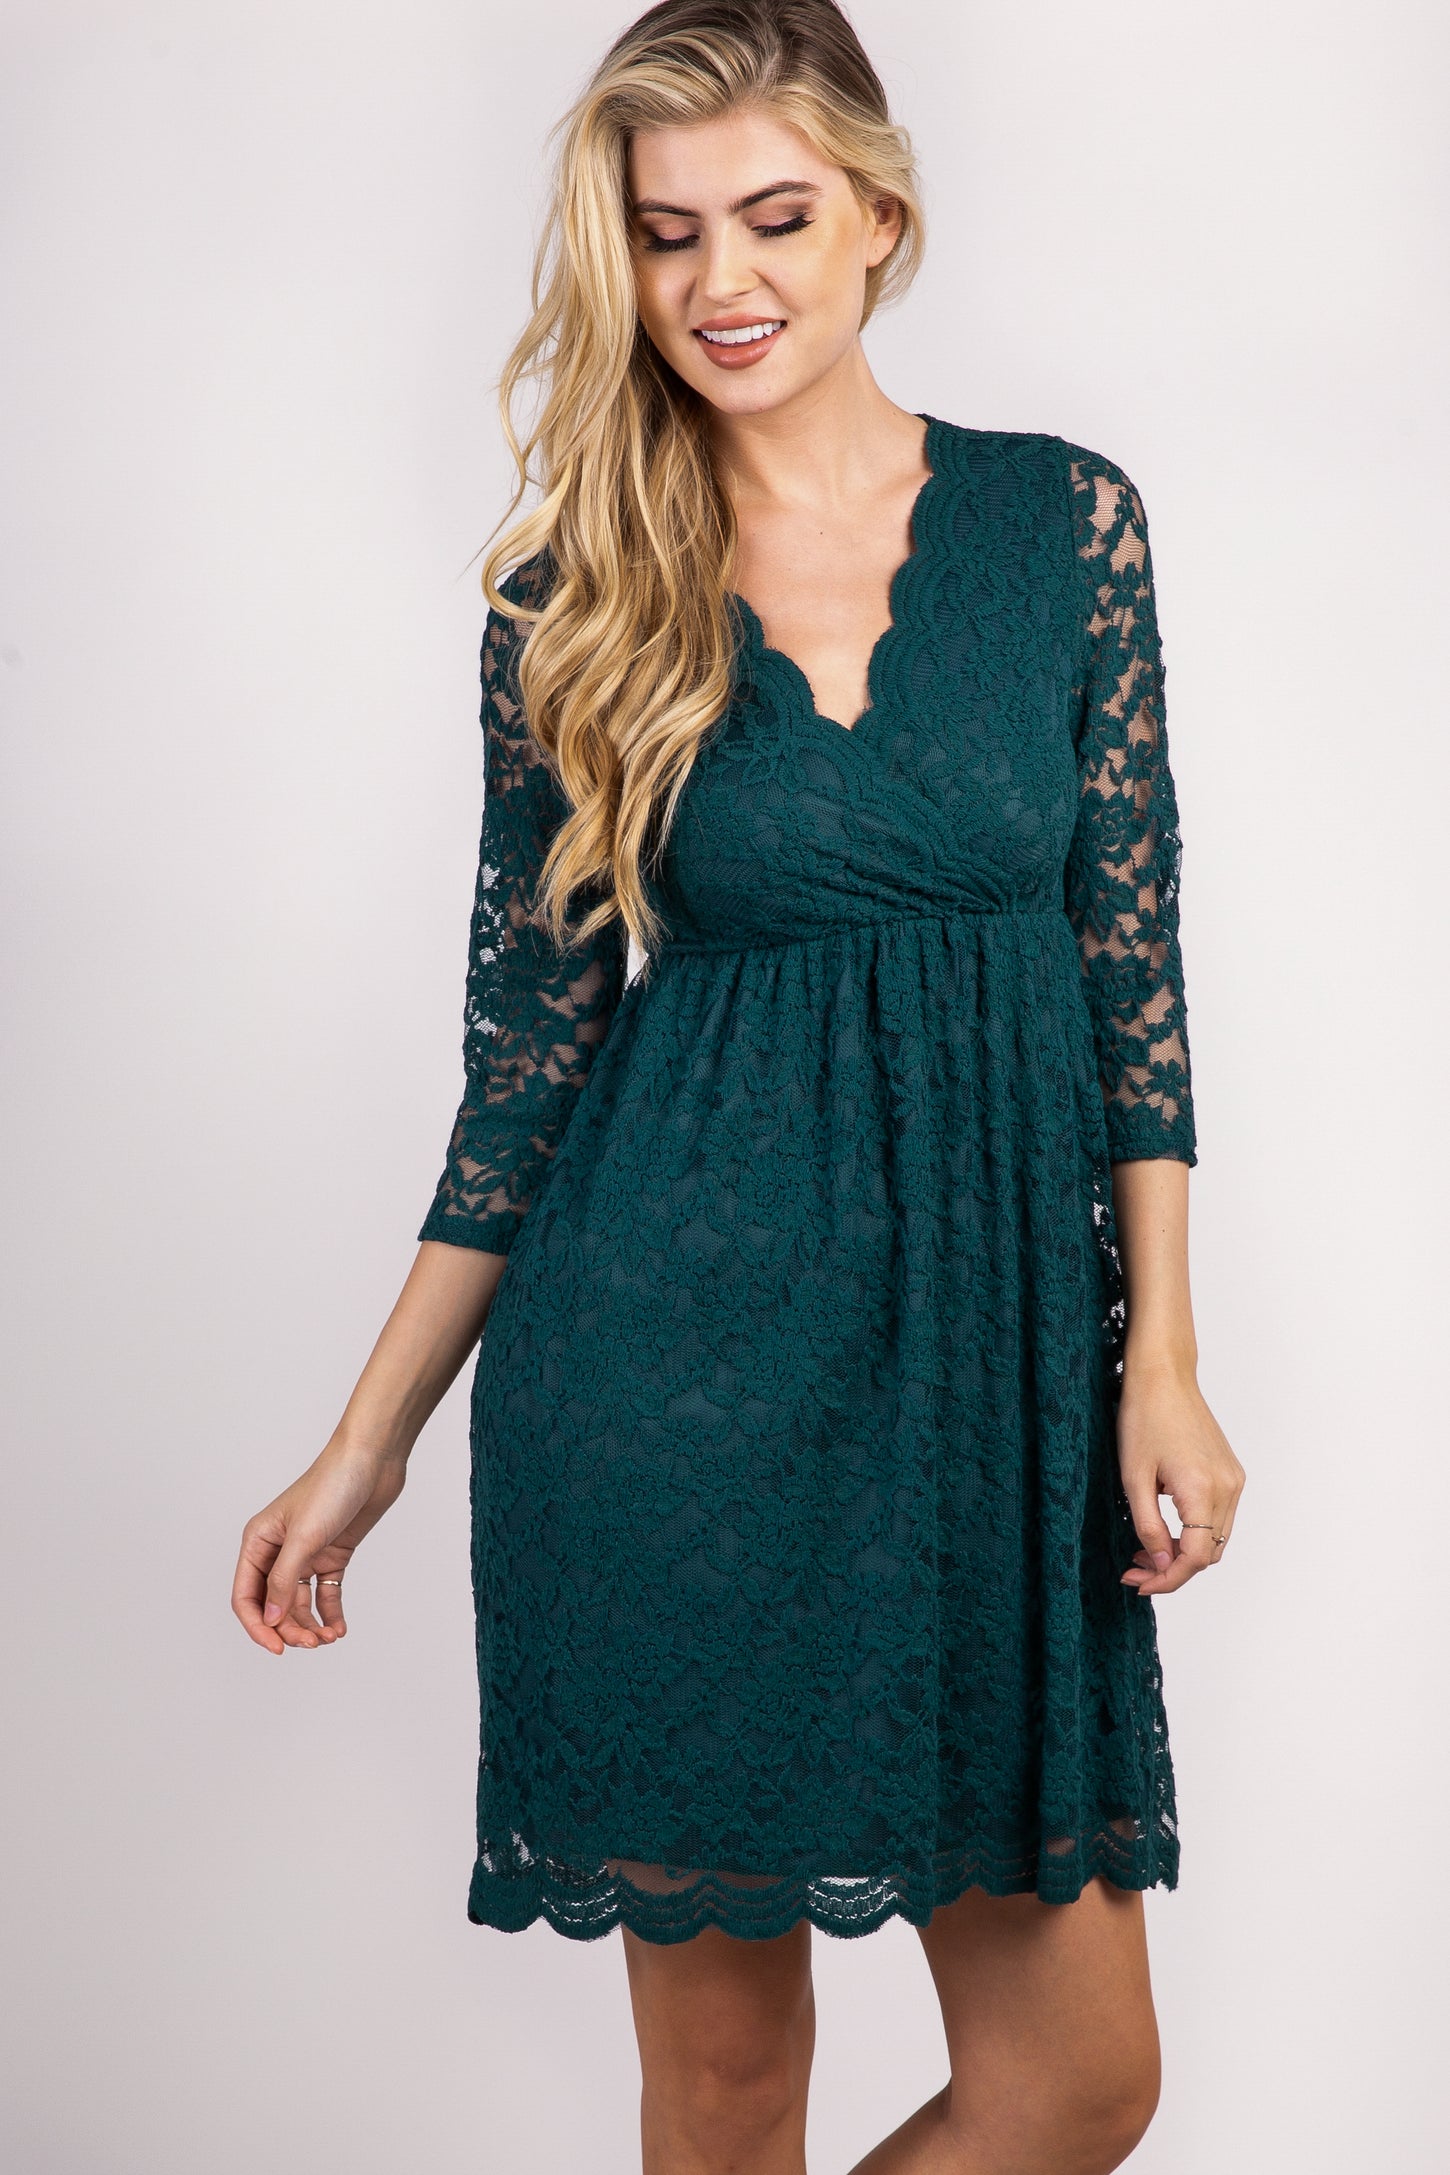 Wrap Green Lace PinkBlush Overlay Forest Dress–